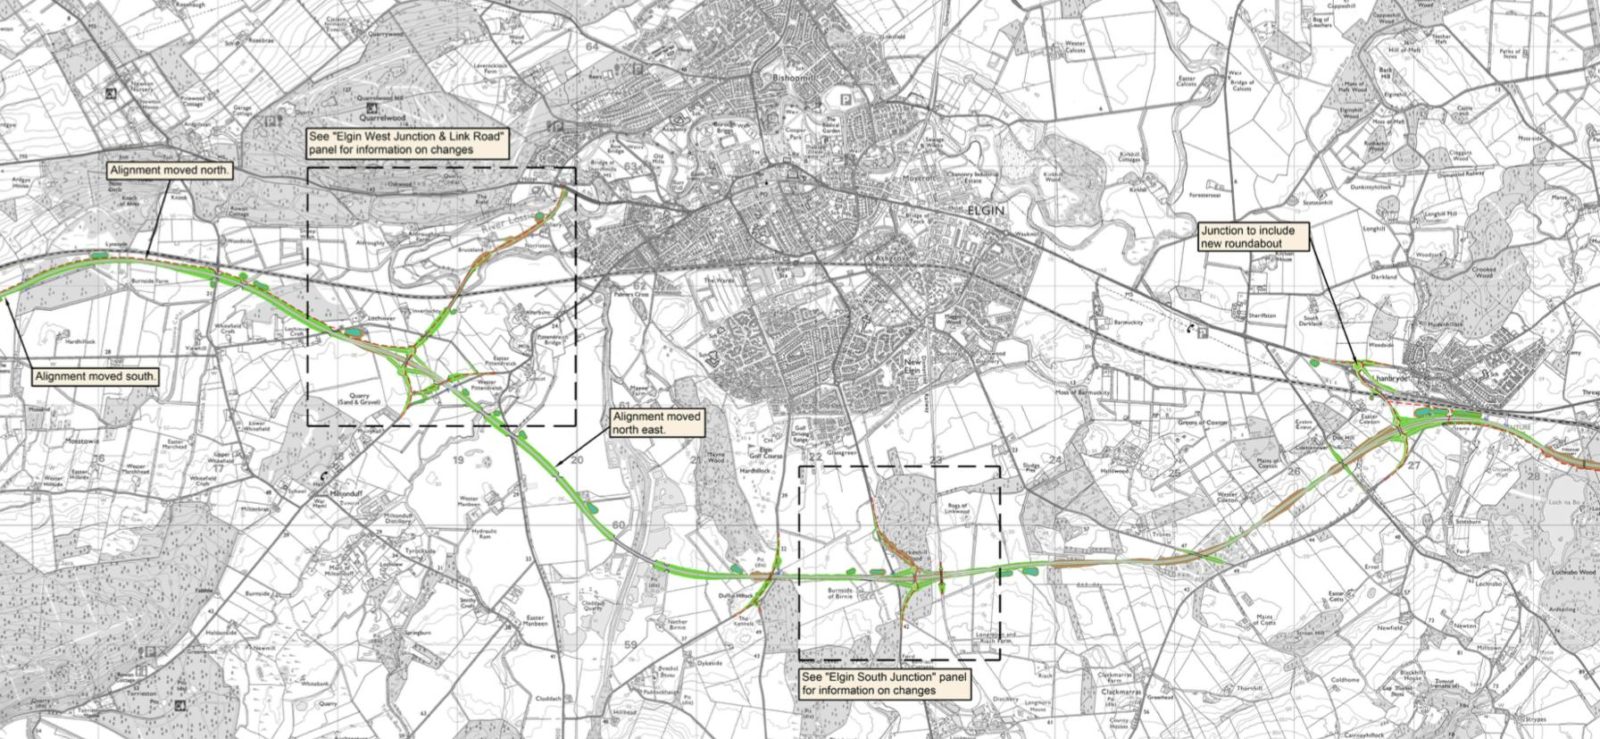 Elgin bypass proposed route